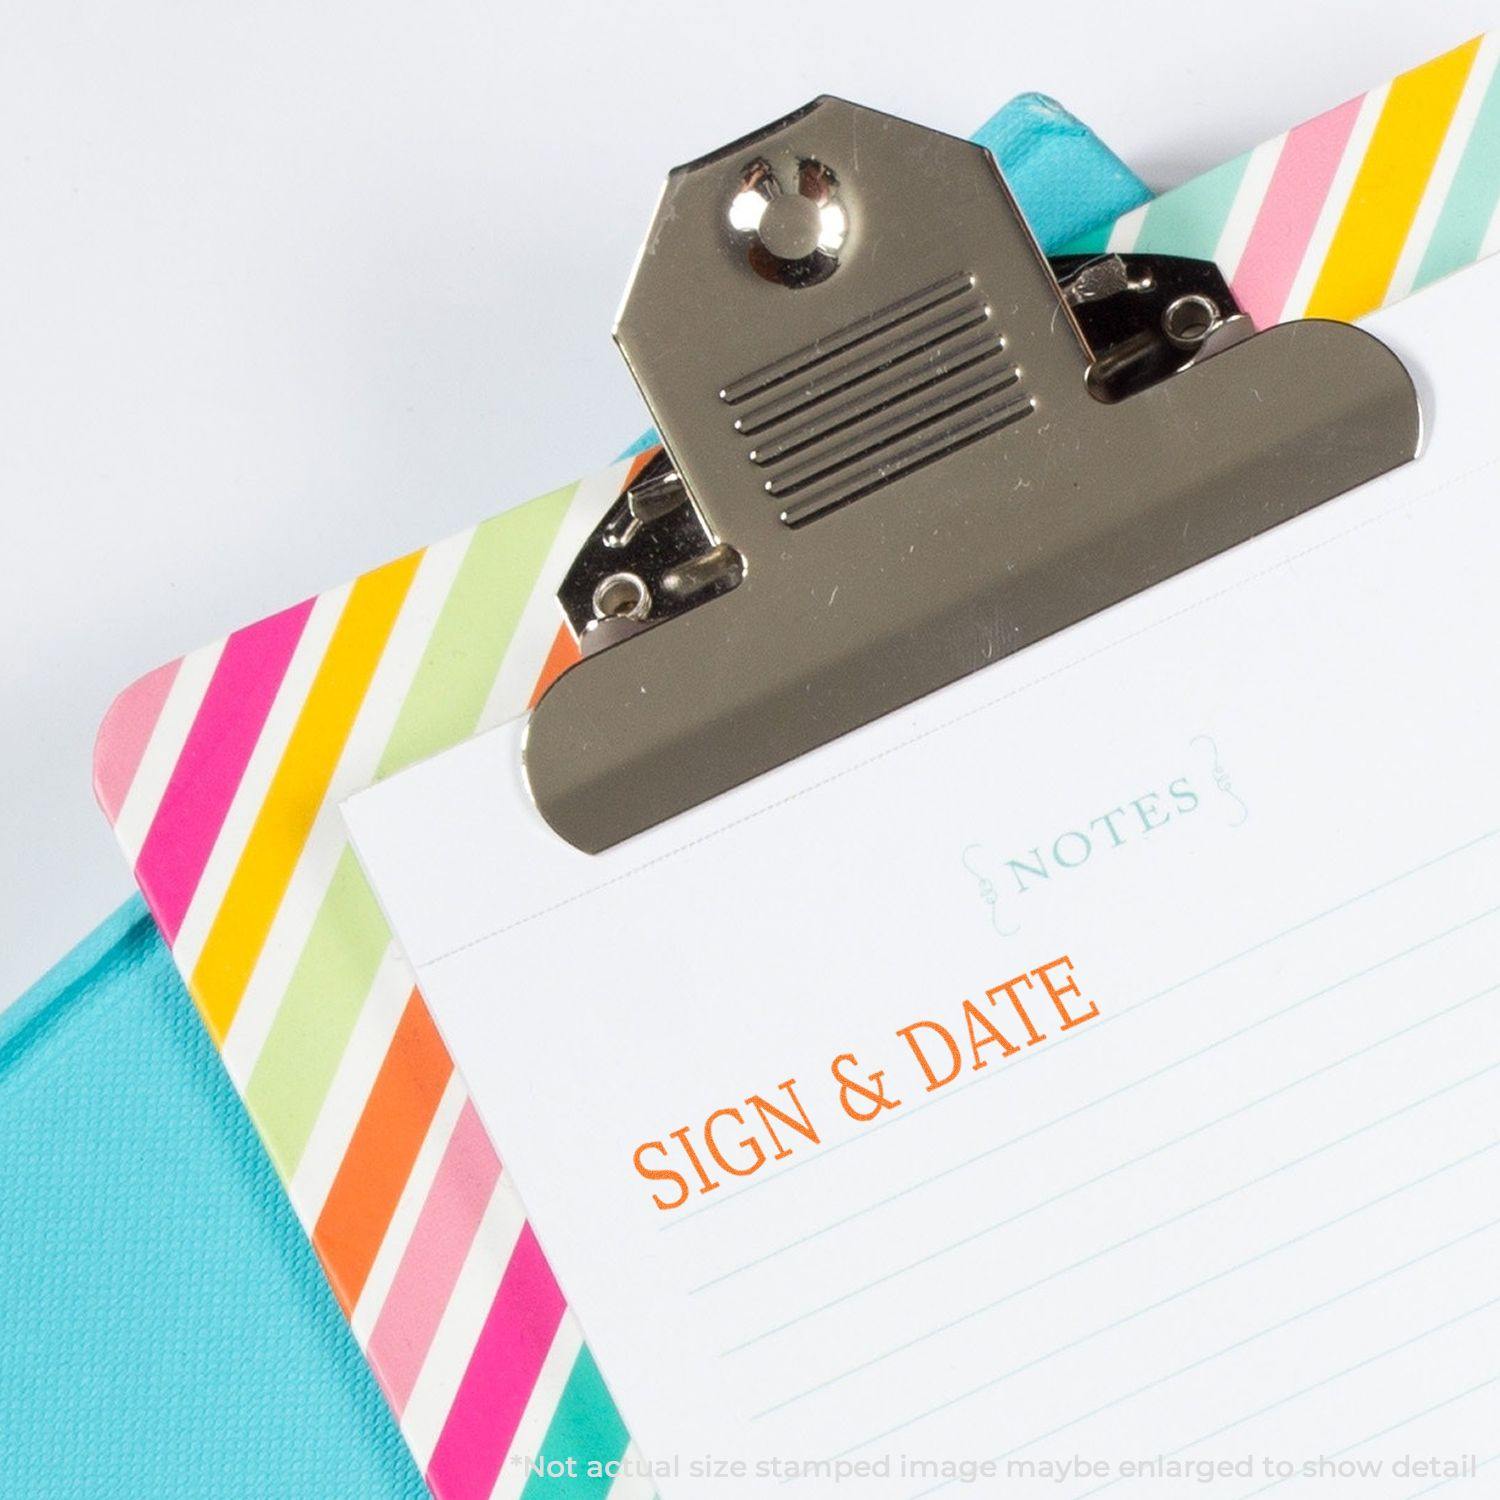 A stock office rubber stamp with a stamped image showing how the text "SIGN & DATE" in a large font is displayed after stamping.